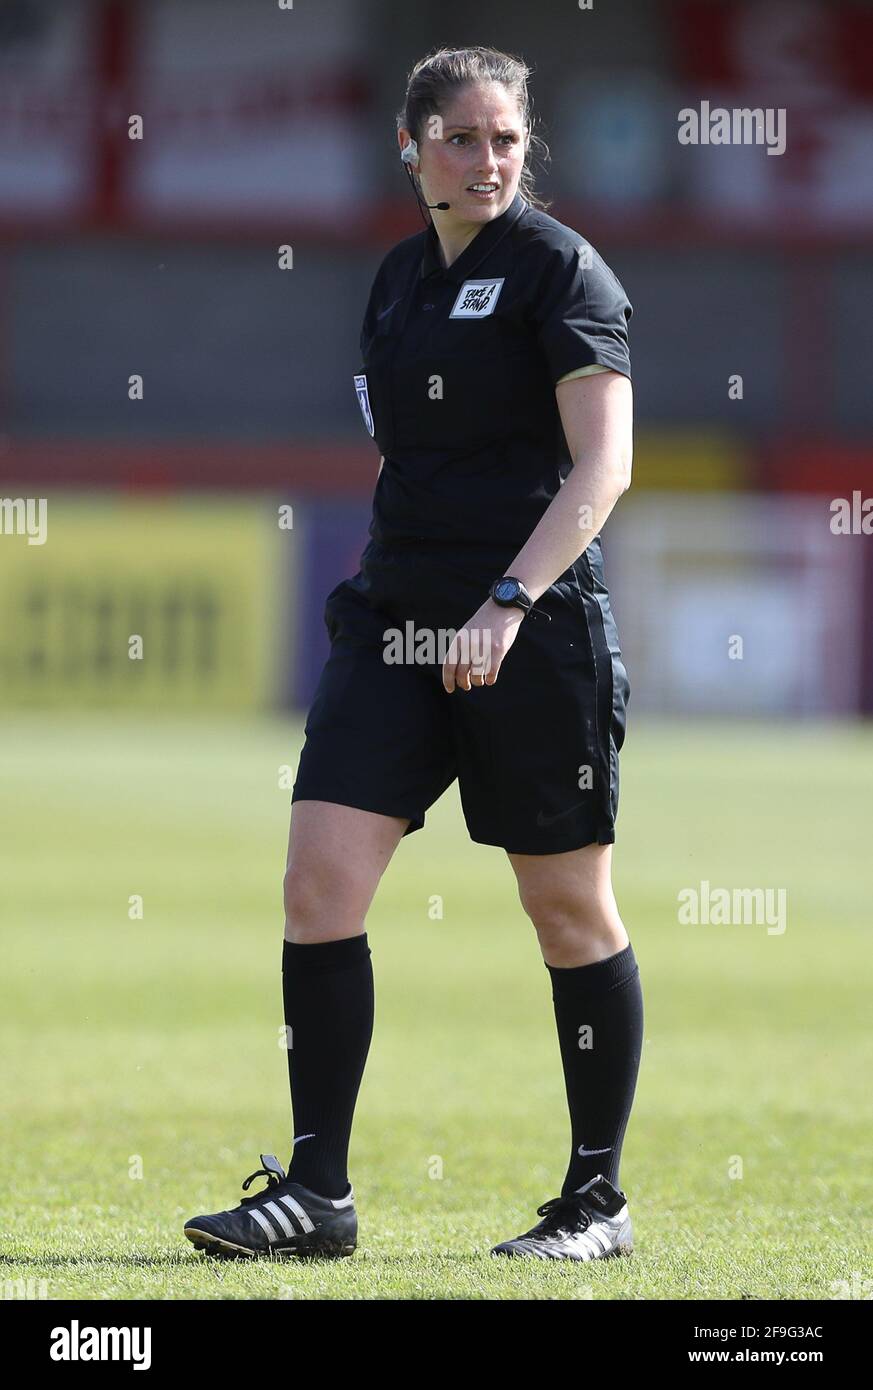 Crawley, UK. 18th April 2021. Referee, Louise Saunders during the Vitality Women's FA Cup match between Brighton & Hove Albion Women and Bristol City Women at The People's Pension Stadium on April 18th 2021 in Crawley, United Kingdom Stock Photo